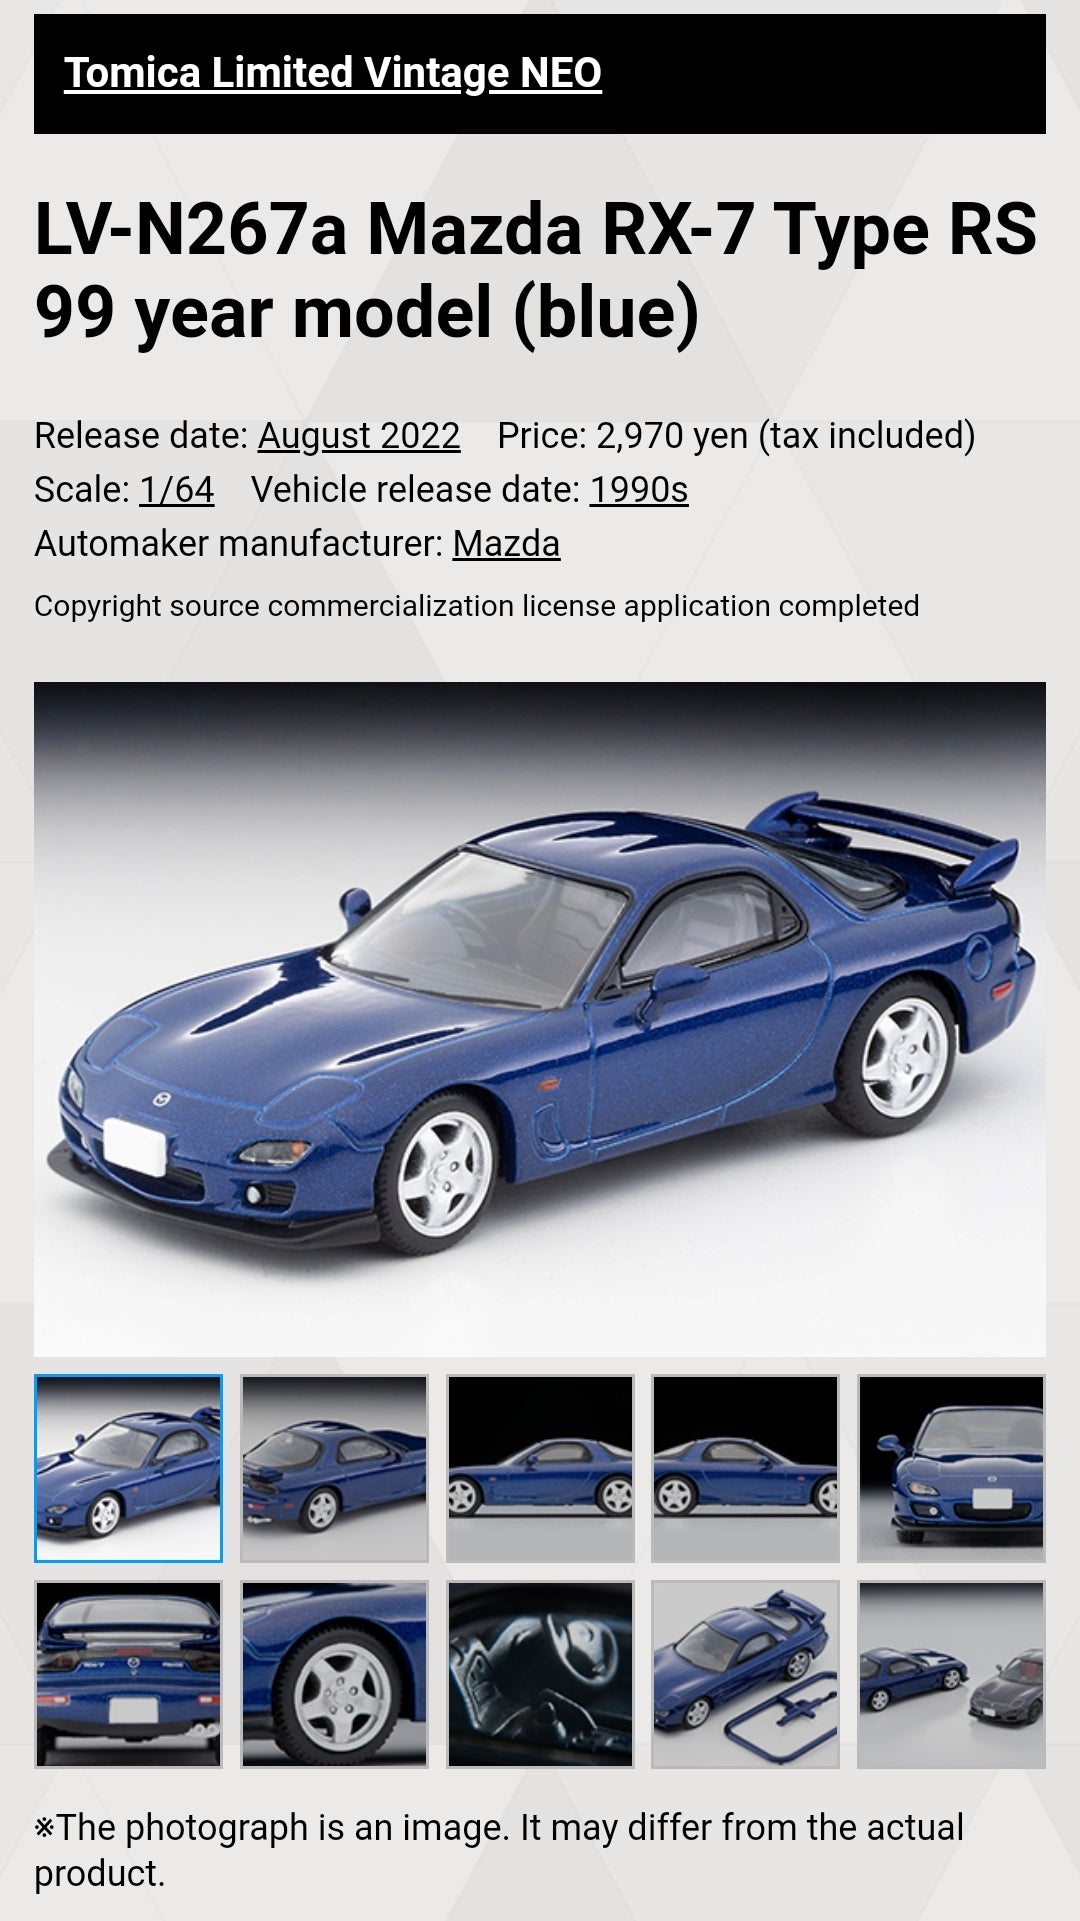 Tomica Limited Vintage Neo LV-N267a Mazda RX-7 Type RS 99 year model (blue) Takara Tomy